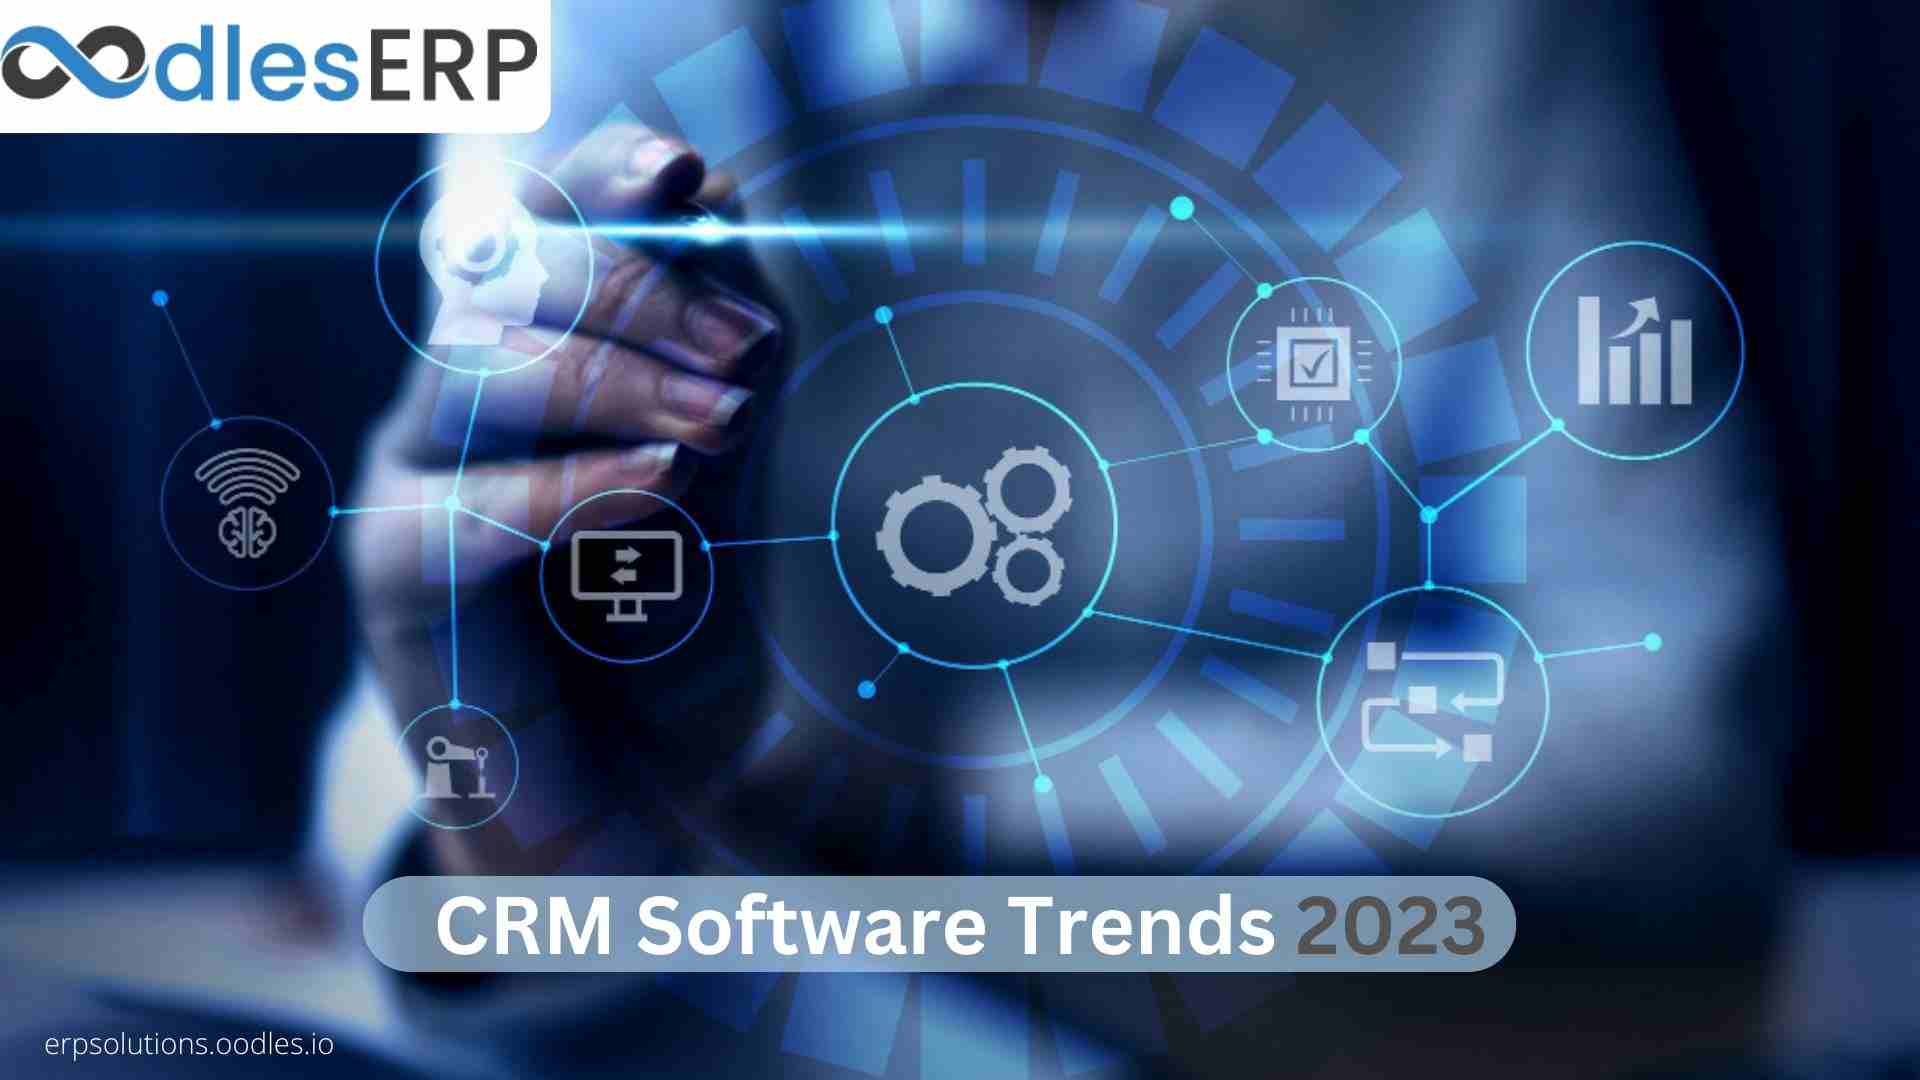 CRM Software Development Trends To Watch In 2023